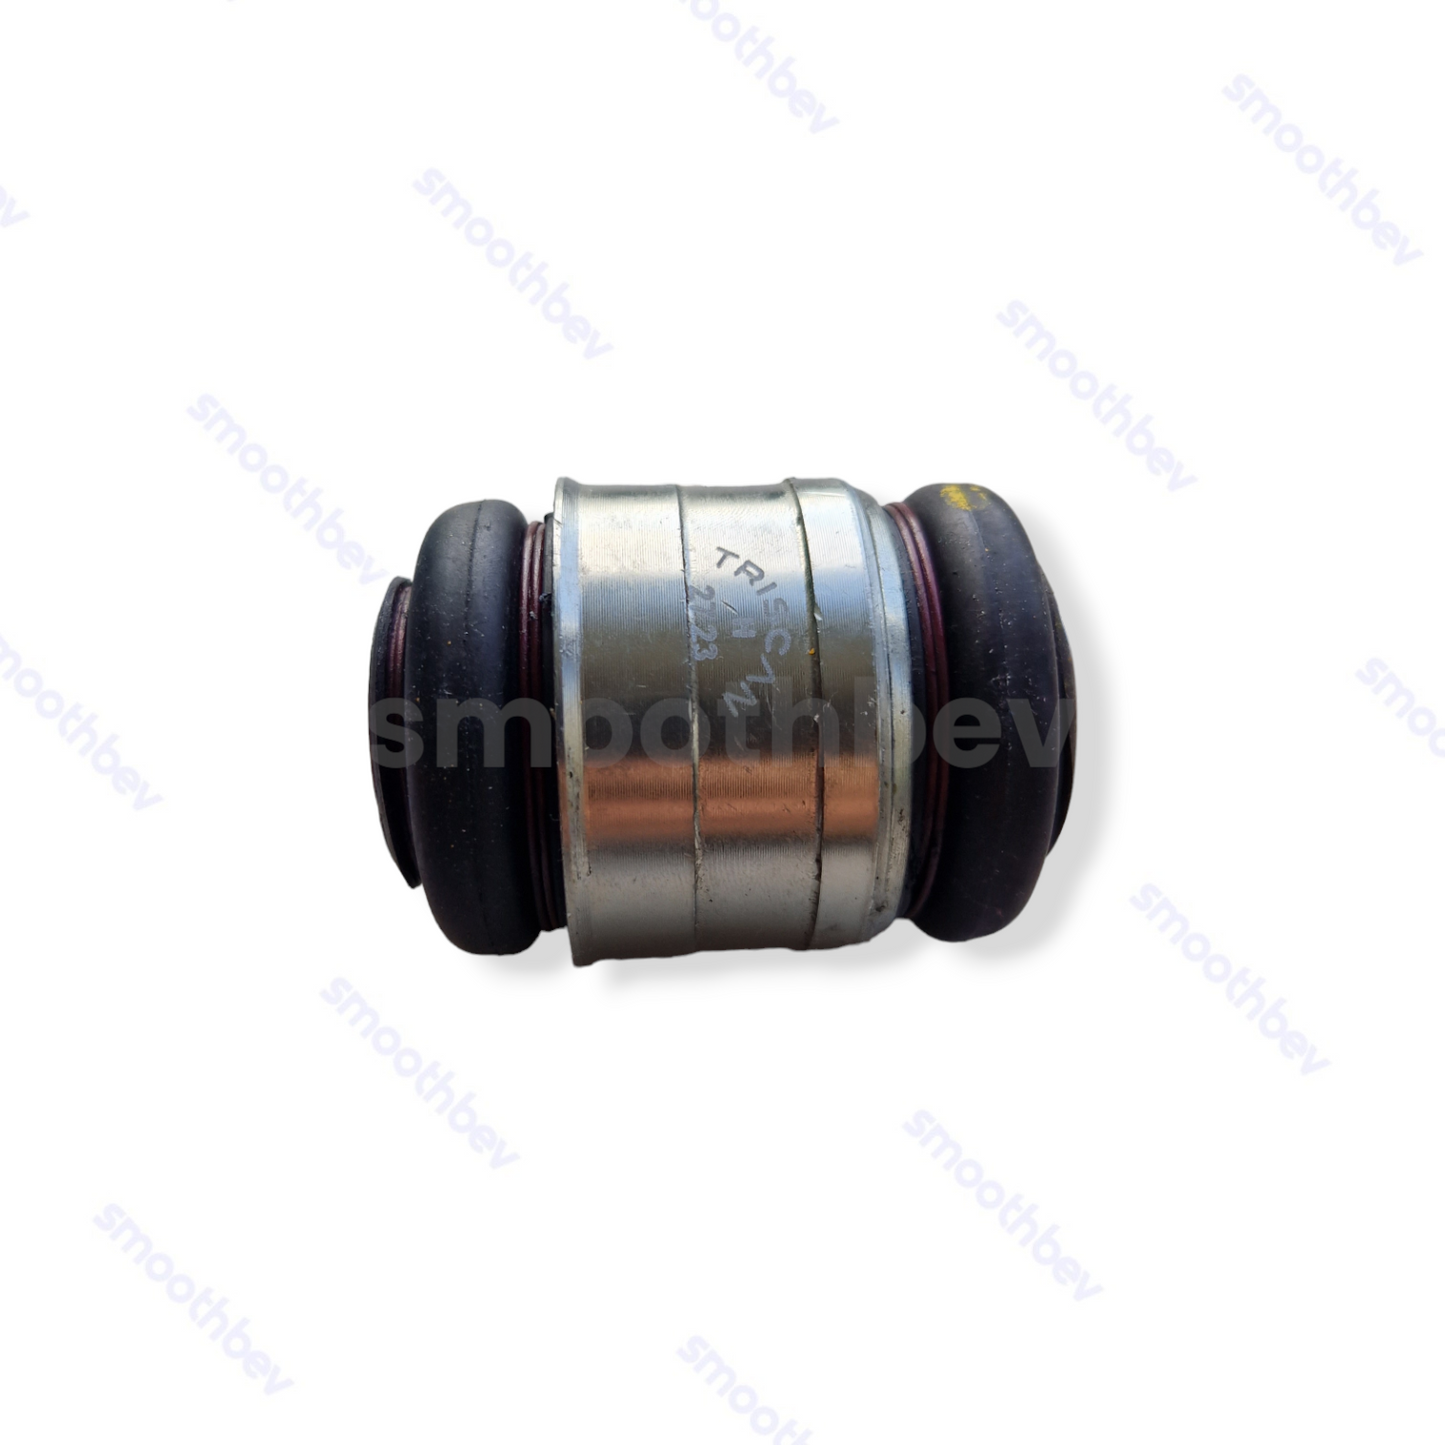 Support arm bushing